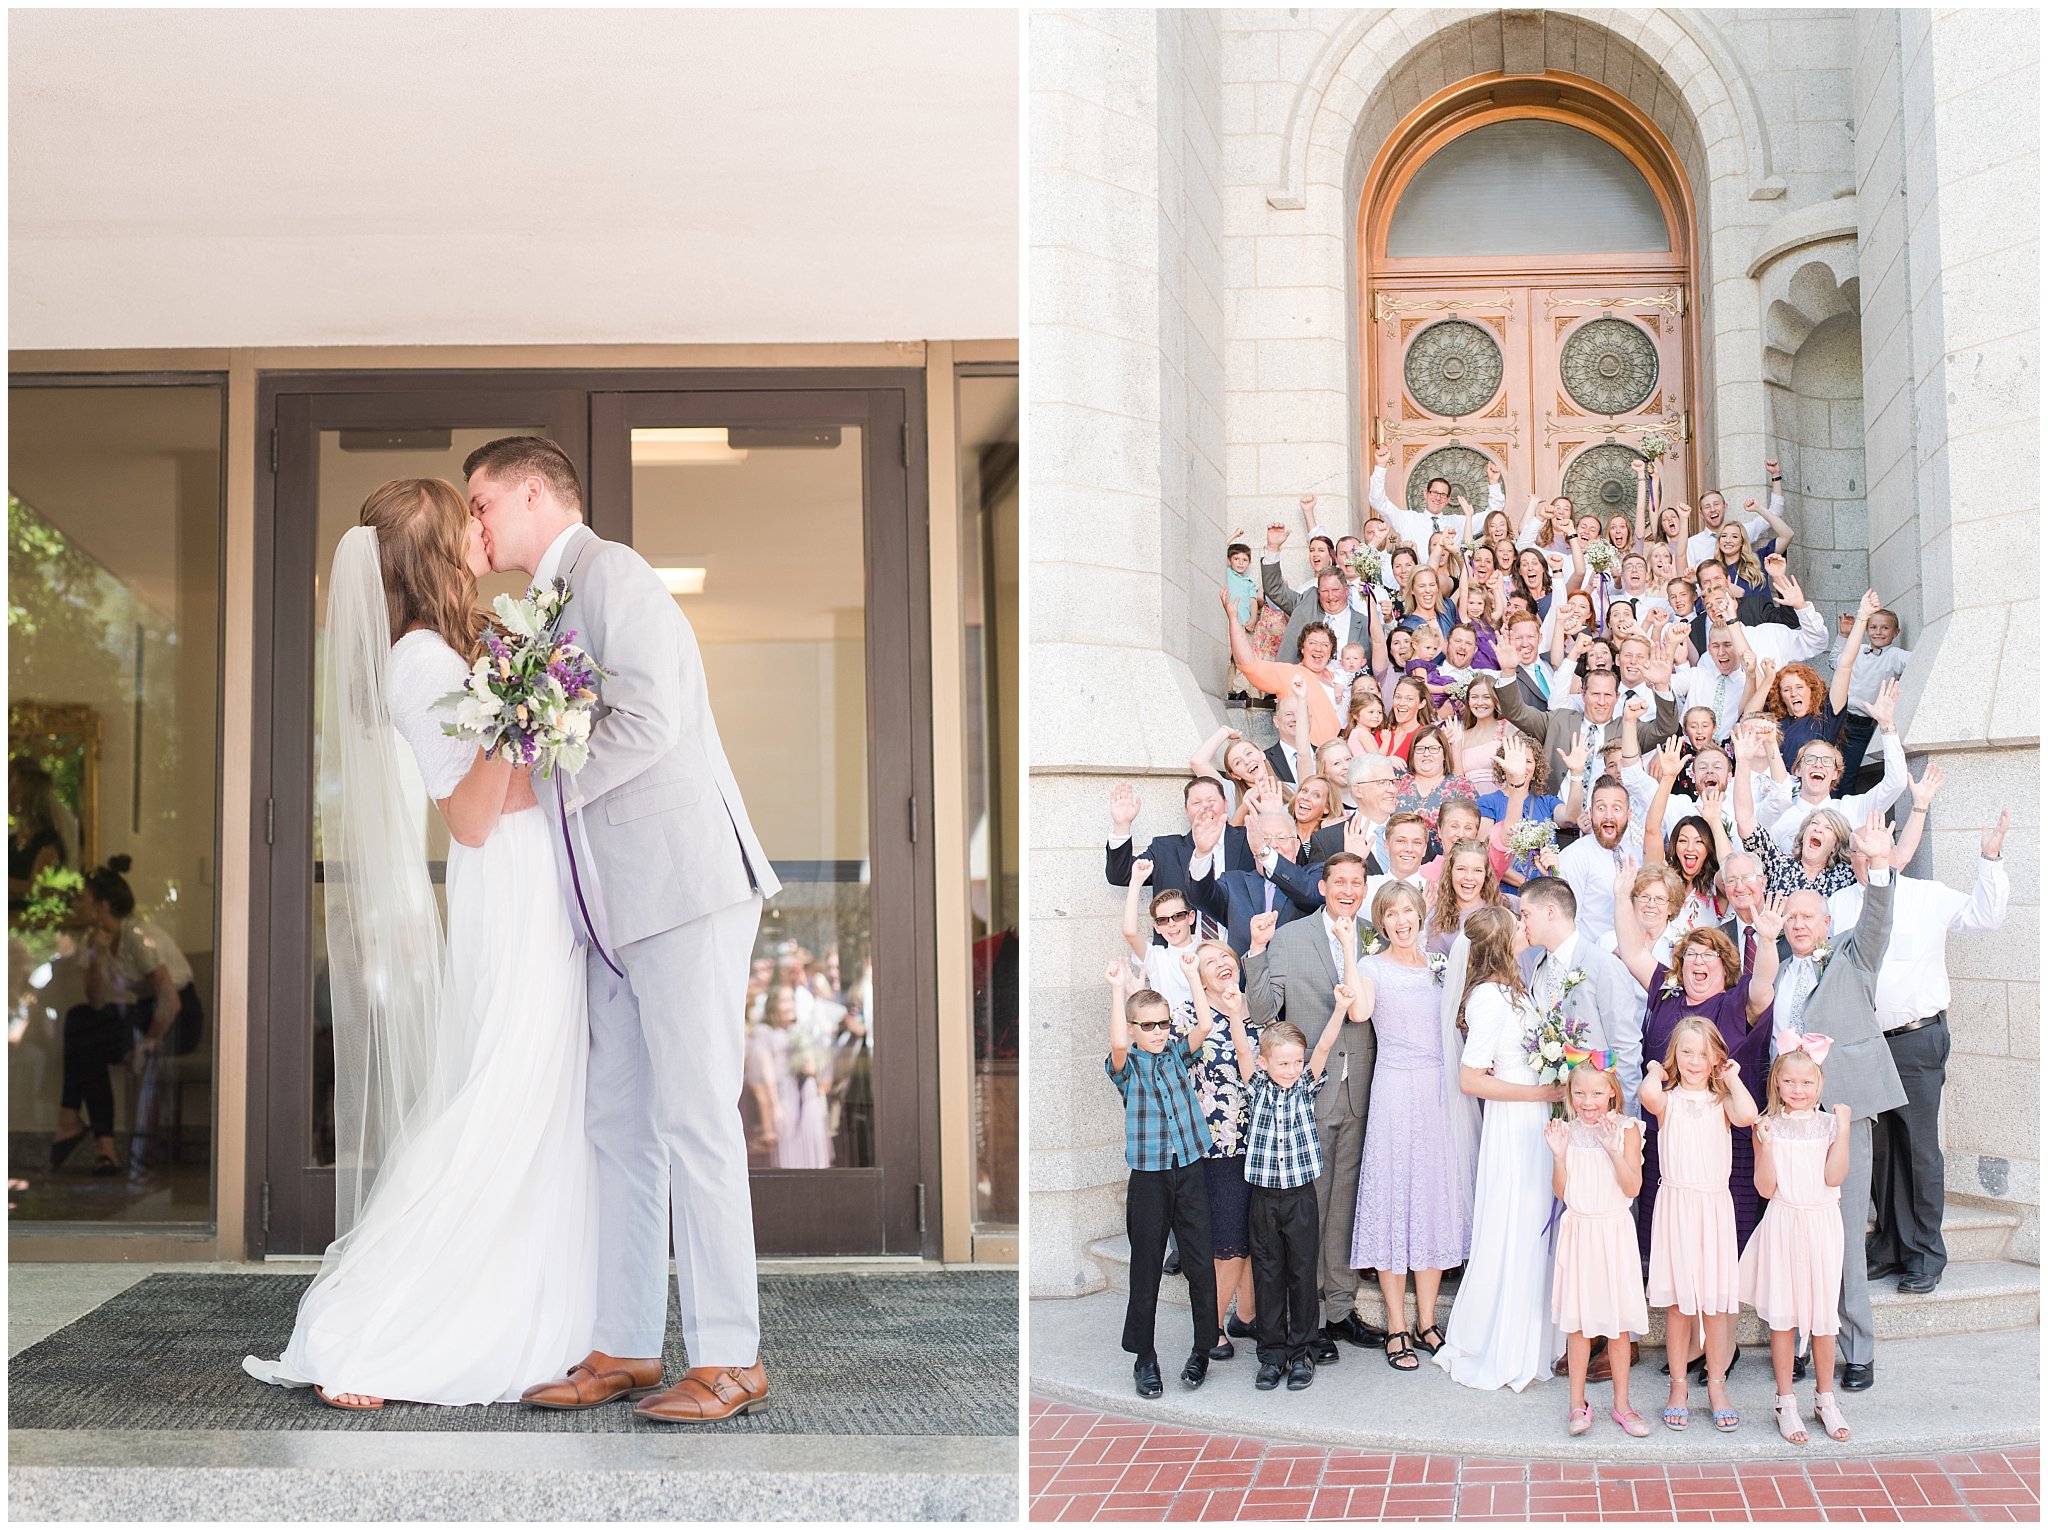 Bride in simple elegant dress with lavender bouquet and groom in grey suit with lavender floral tie | Kiss on temple stairs | Salt Lake Temple Wedding | Utah Wedding Photographers | Jessie and Dallin Photography